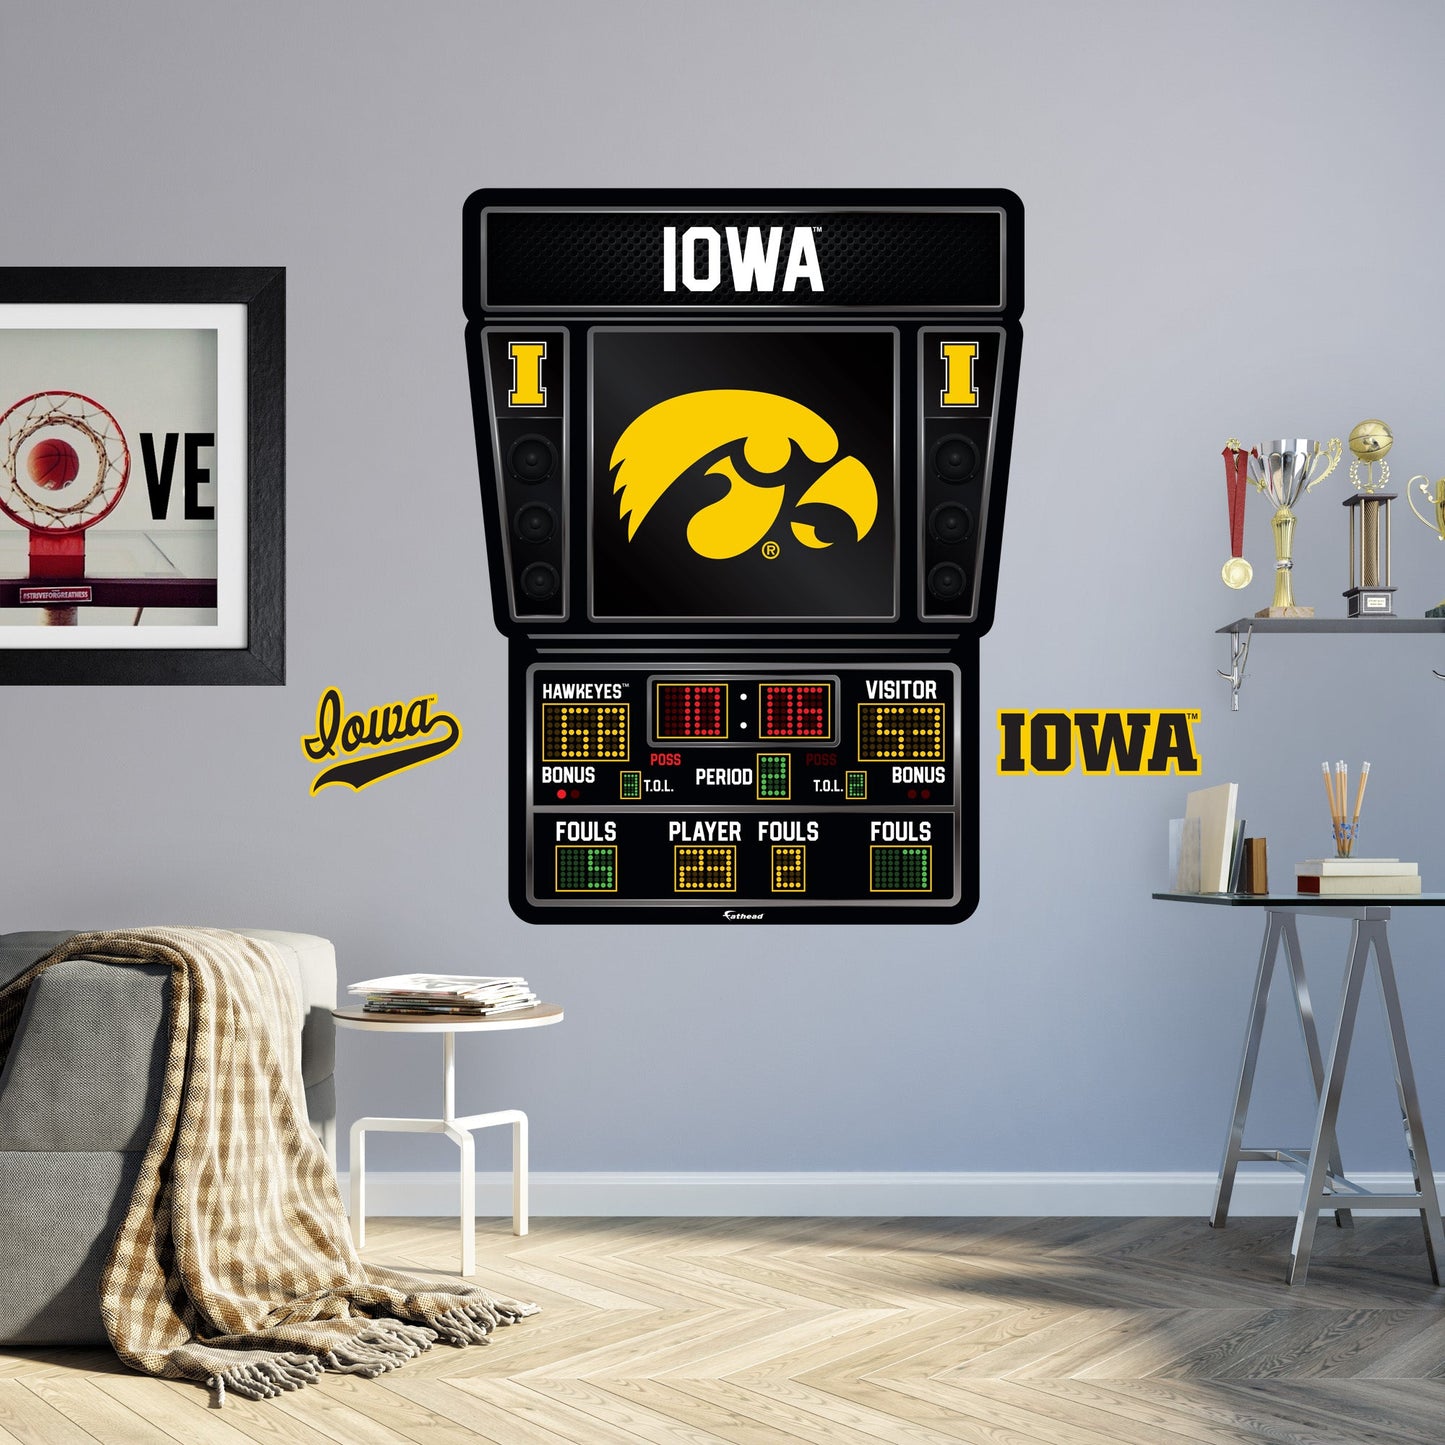 Iowa Hawkeyes:   Basketball Scoreboard        - Officially Licensed NCAA Removable     Adhesive Decal